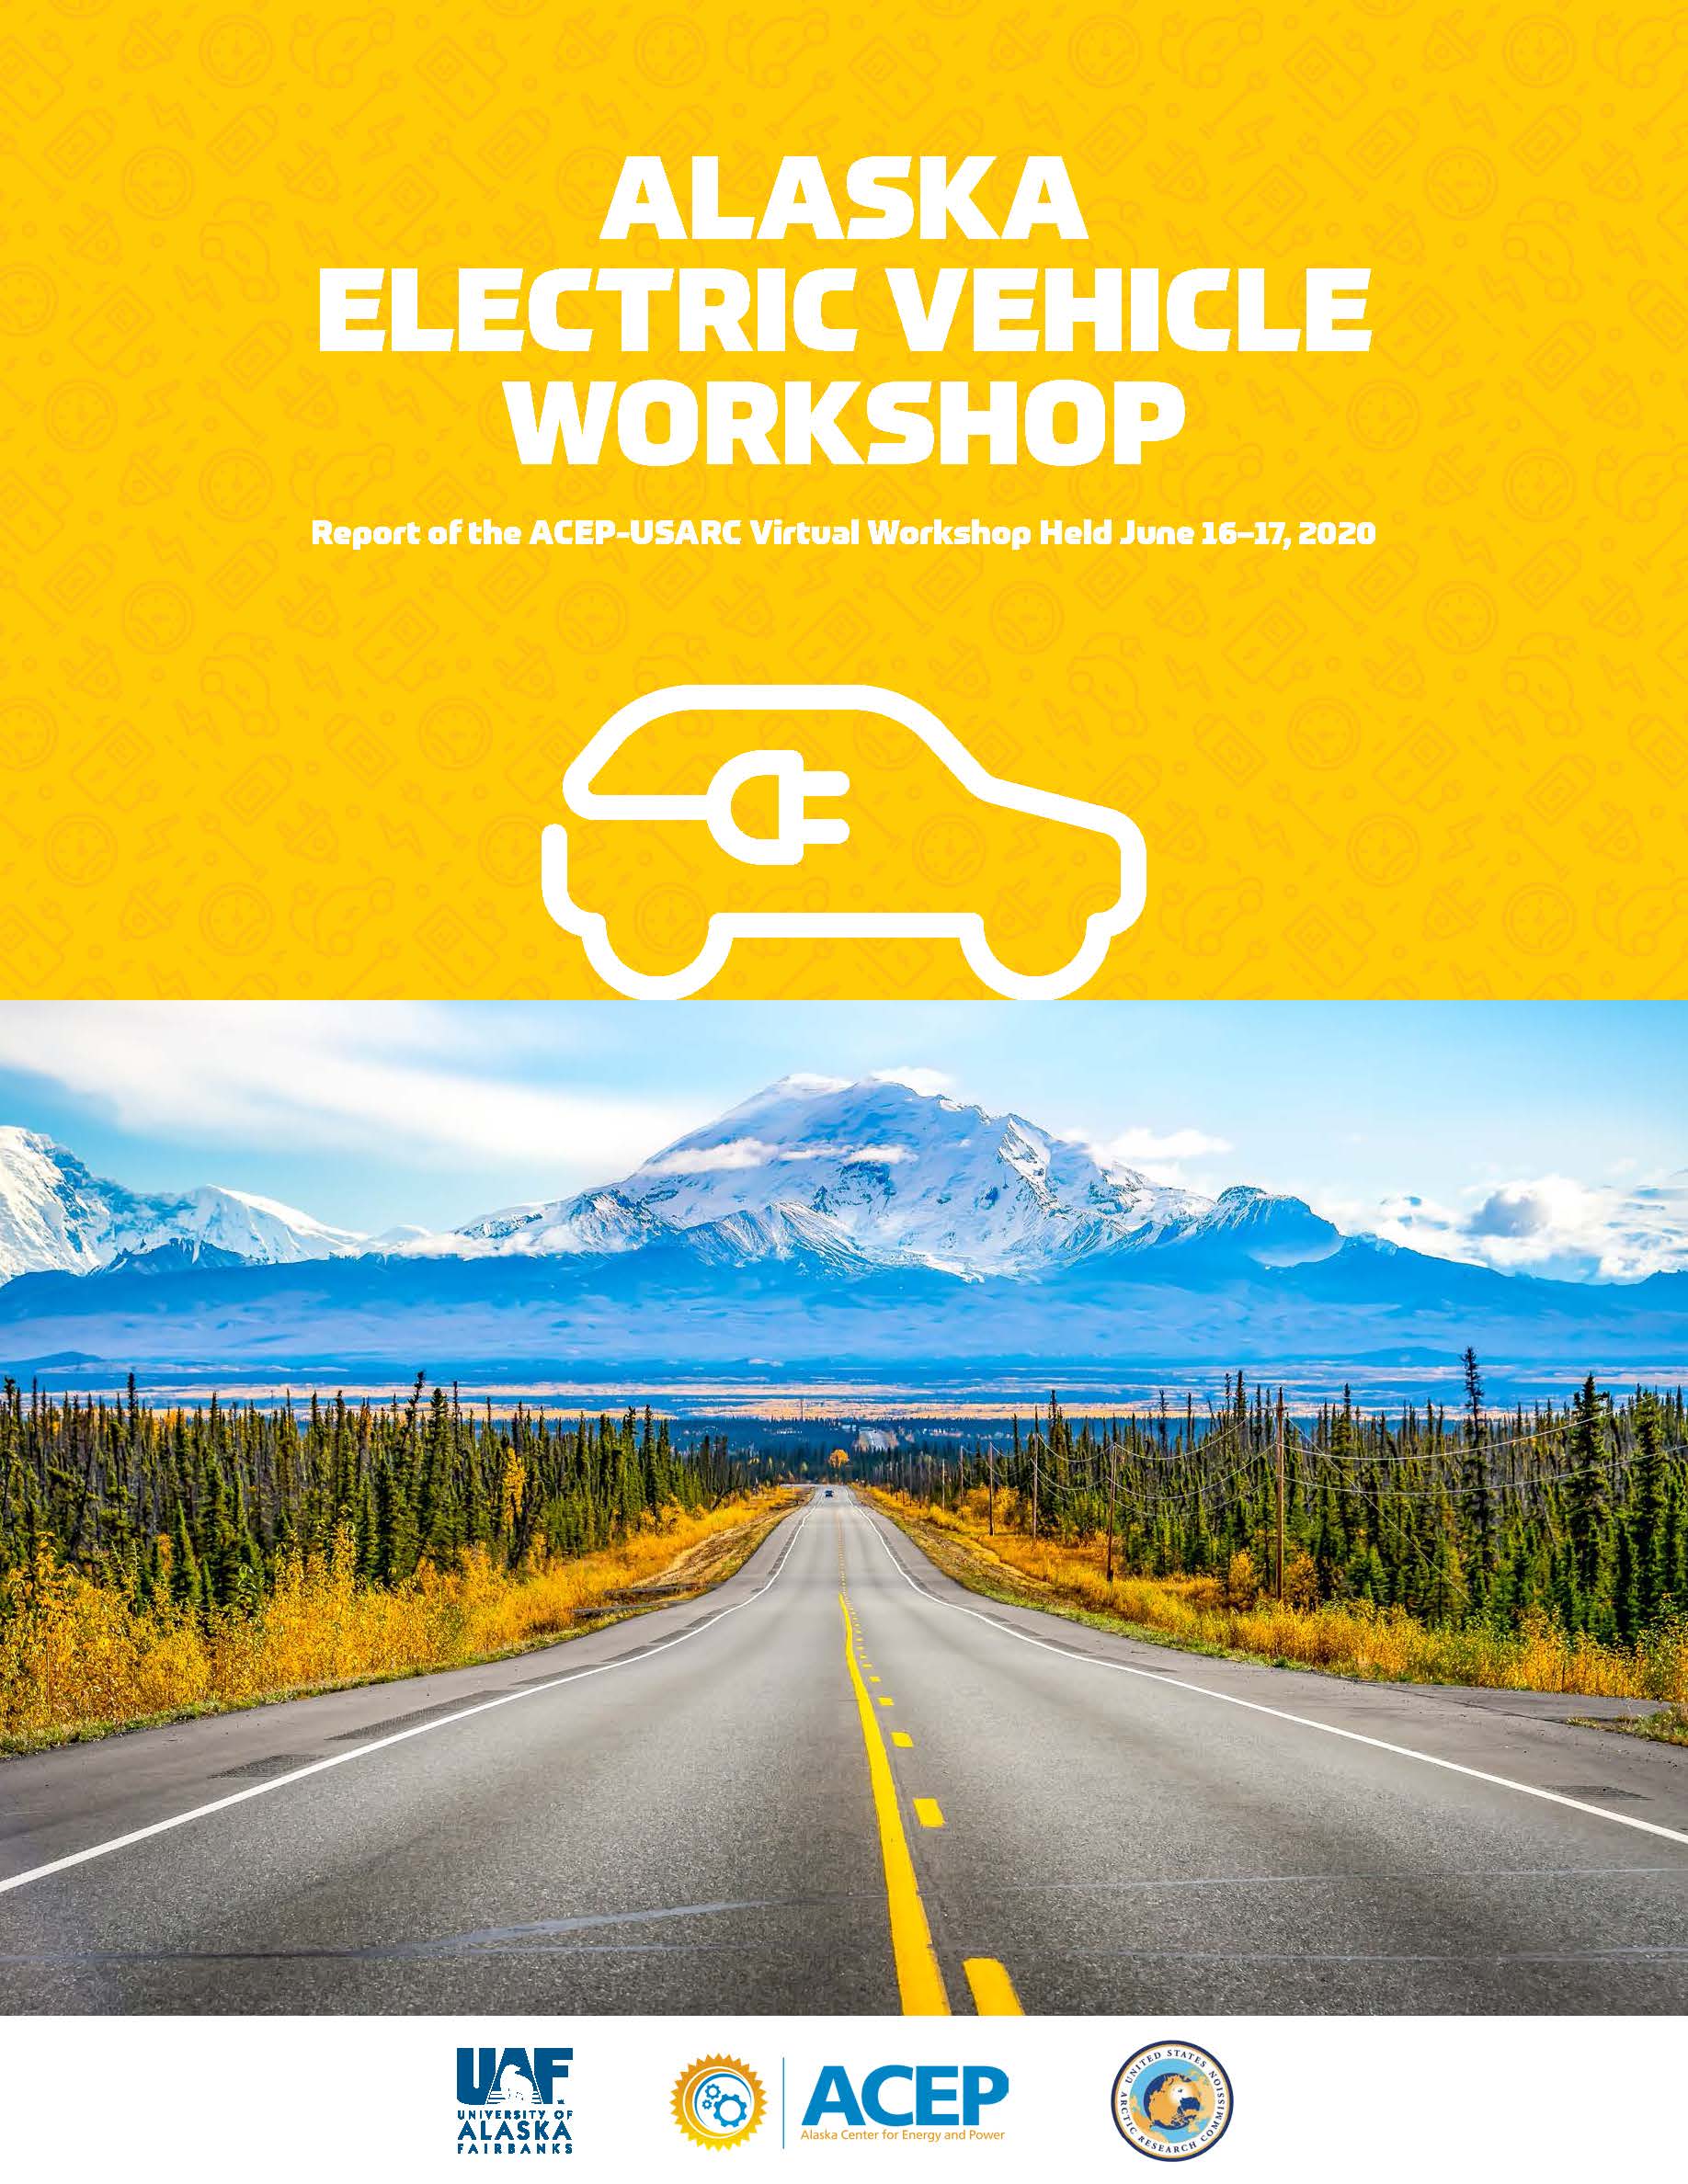 Alaska Electric Vehicle Workshop Report Now Available